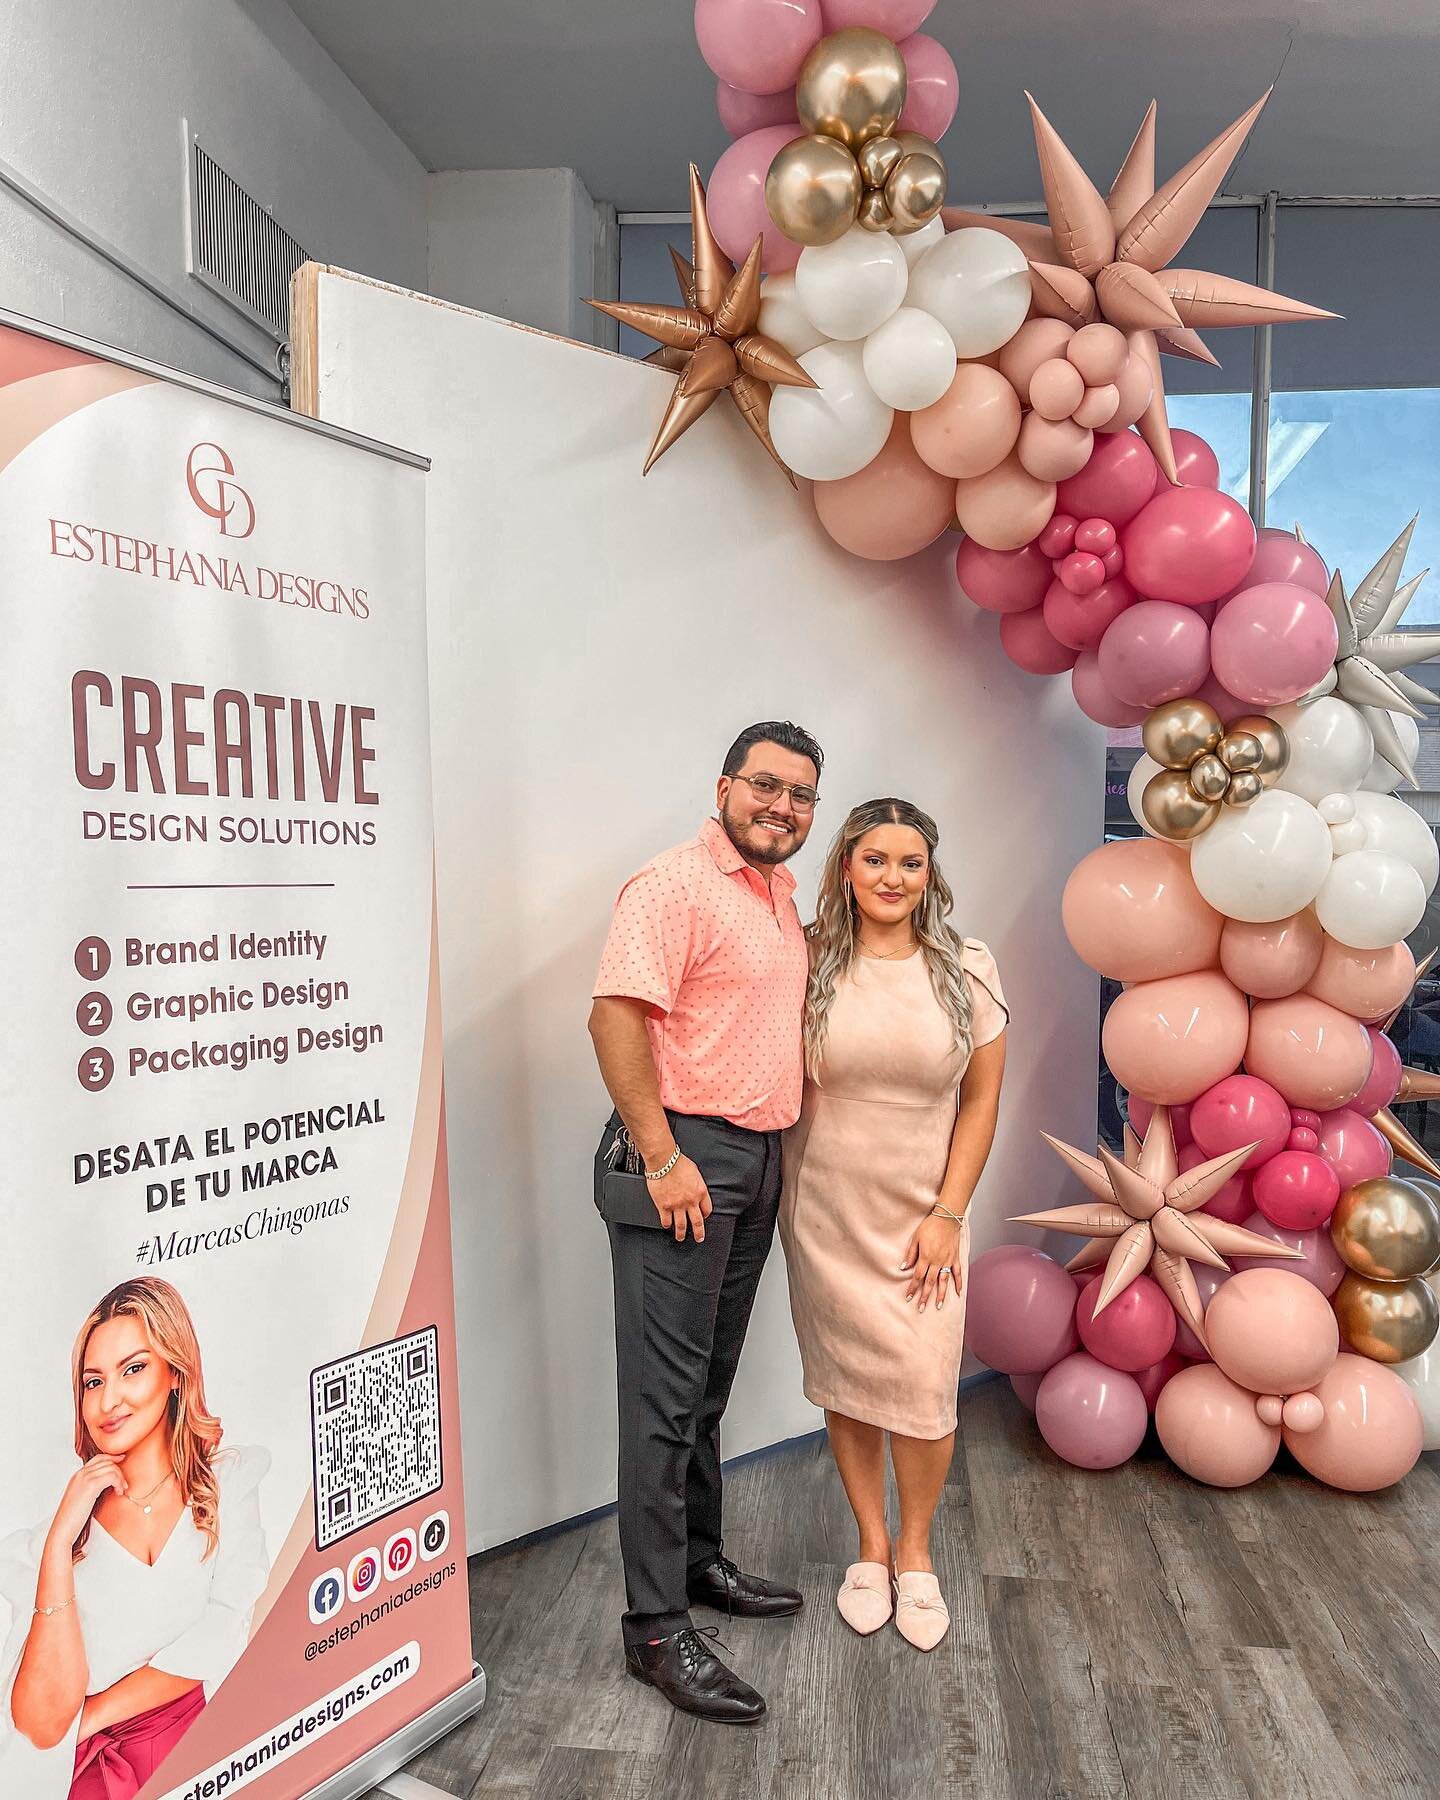 Behind every thriving business is a strong support system, a loyal community, and a whole lot of coraz&oacute;n y pasi&oacute;n 🩷🙌 

#estephaniadesigns #estephaniadesigns5years #dallasentrepreneurs #businessanniversary #latinasinbusiness #diseñado